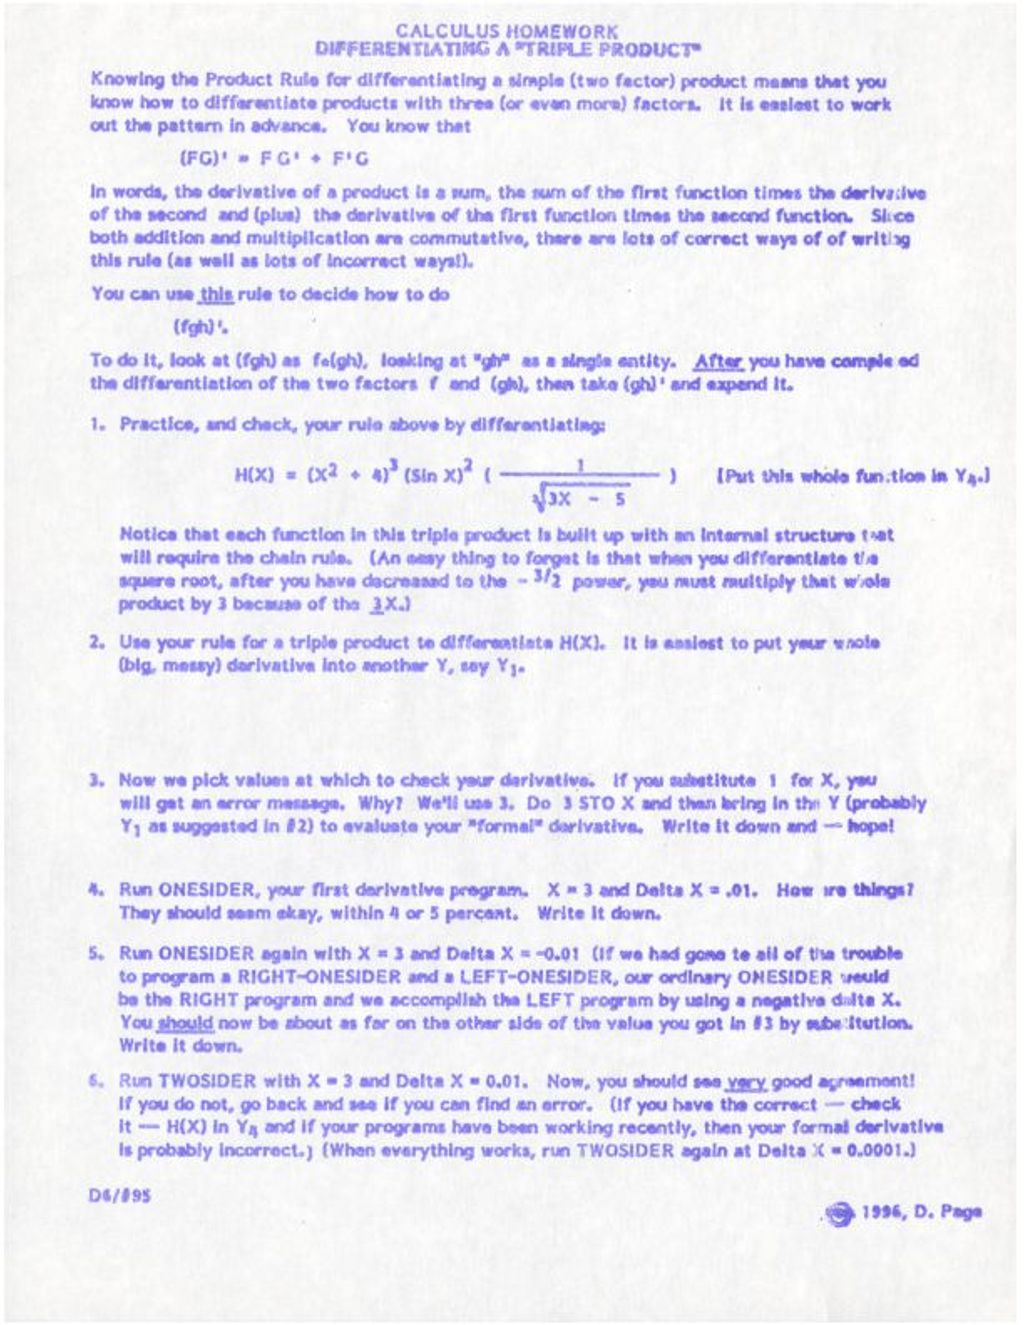 Miniature of Calculus Homework Differentiating a “Triple Product” (1996)